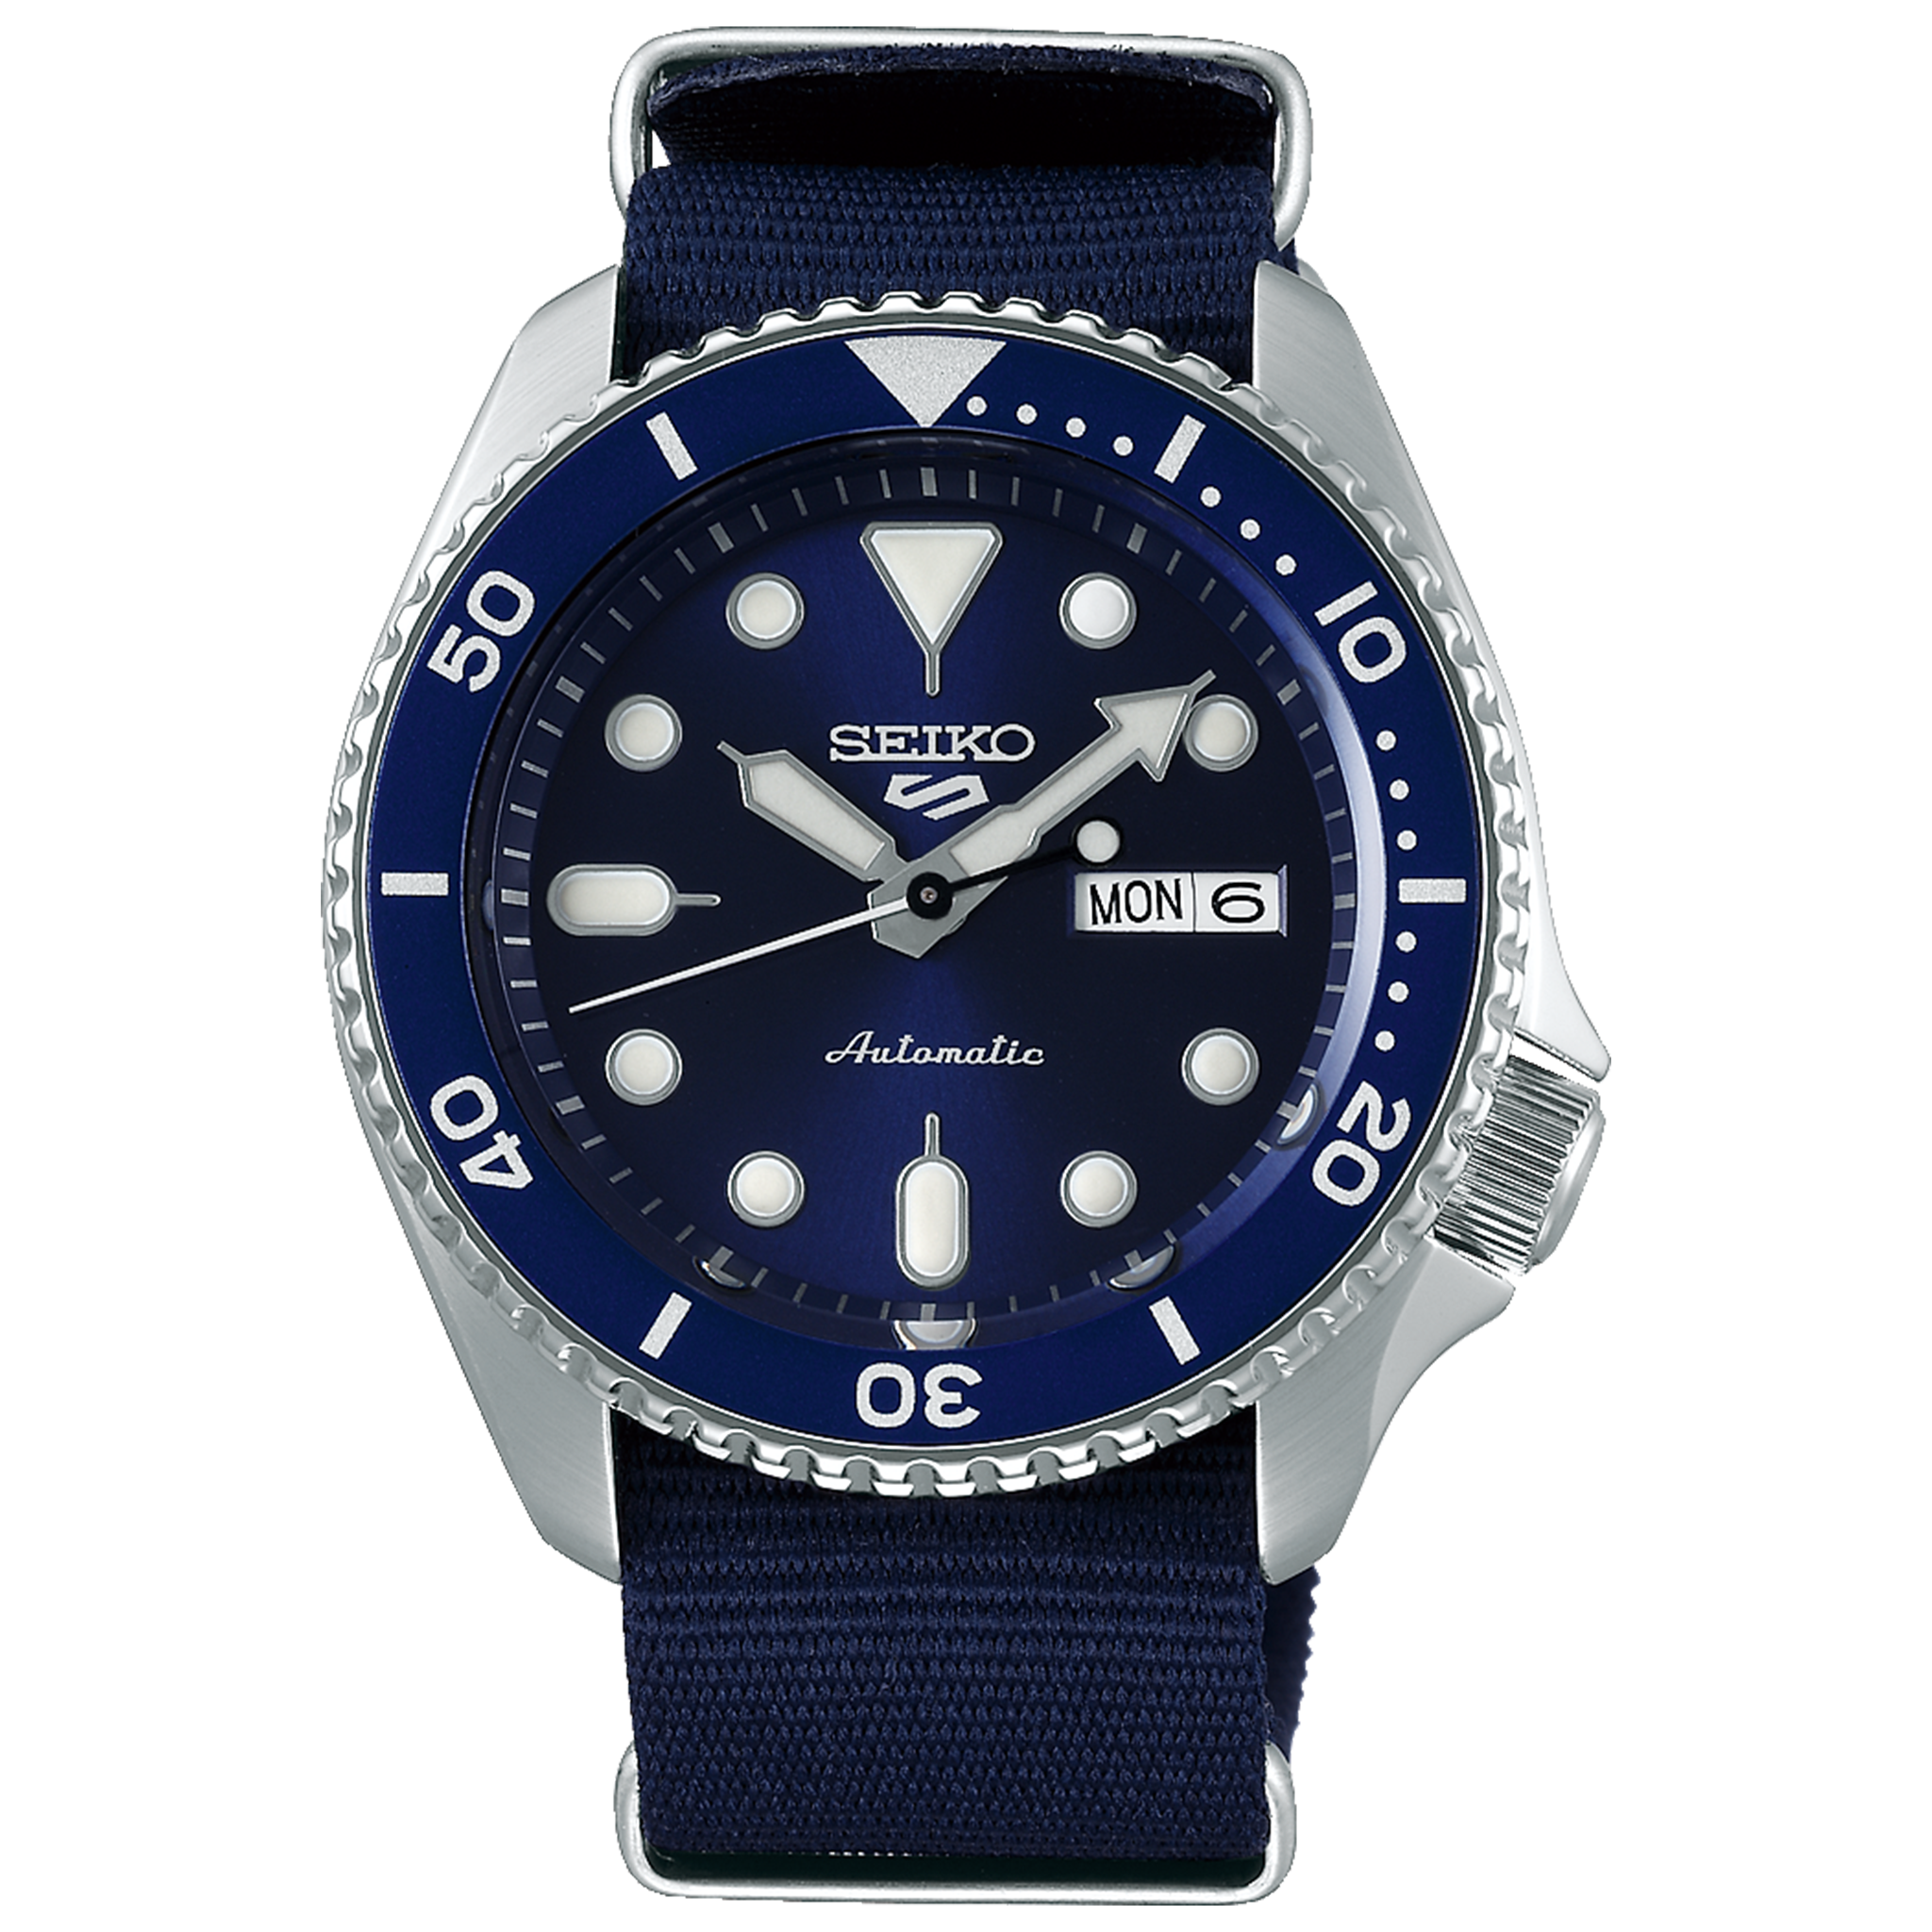 SEIKO 5 SPORTS AUTOMATIC WATCH IN BLUE SRPD51K2